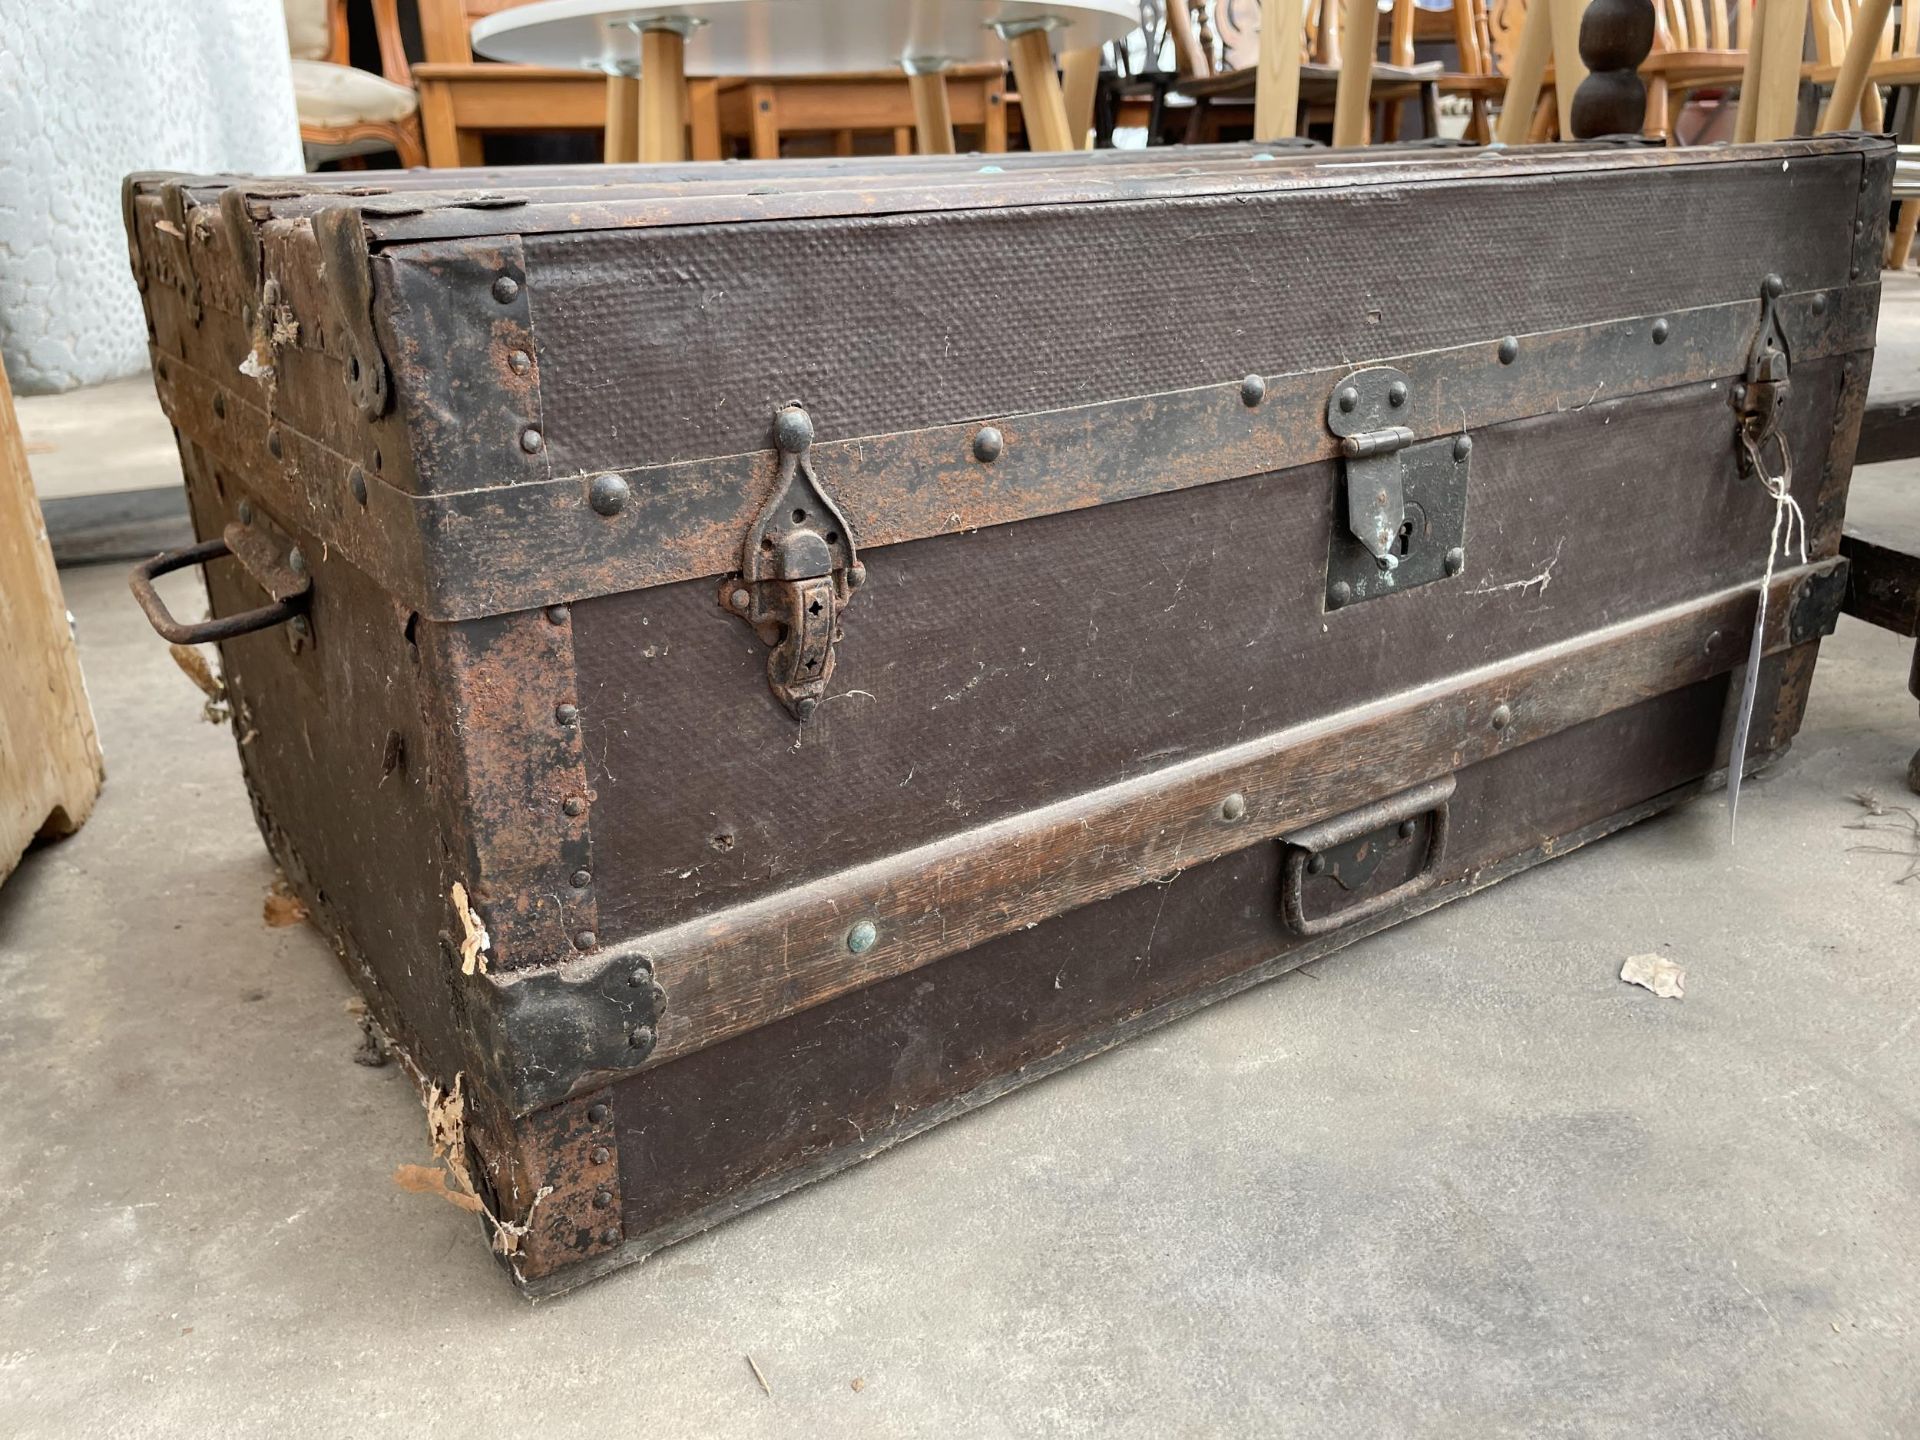 A VICTORIAN CONMPRESSED FIBRE TRAVELLING TRUNK WITH WOODEN SLATS AND METAL FITTINGS - Image 2 of 3